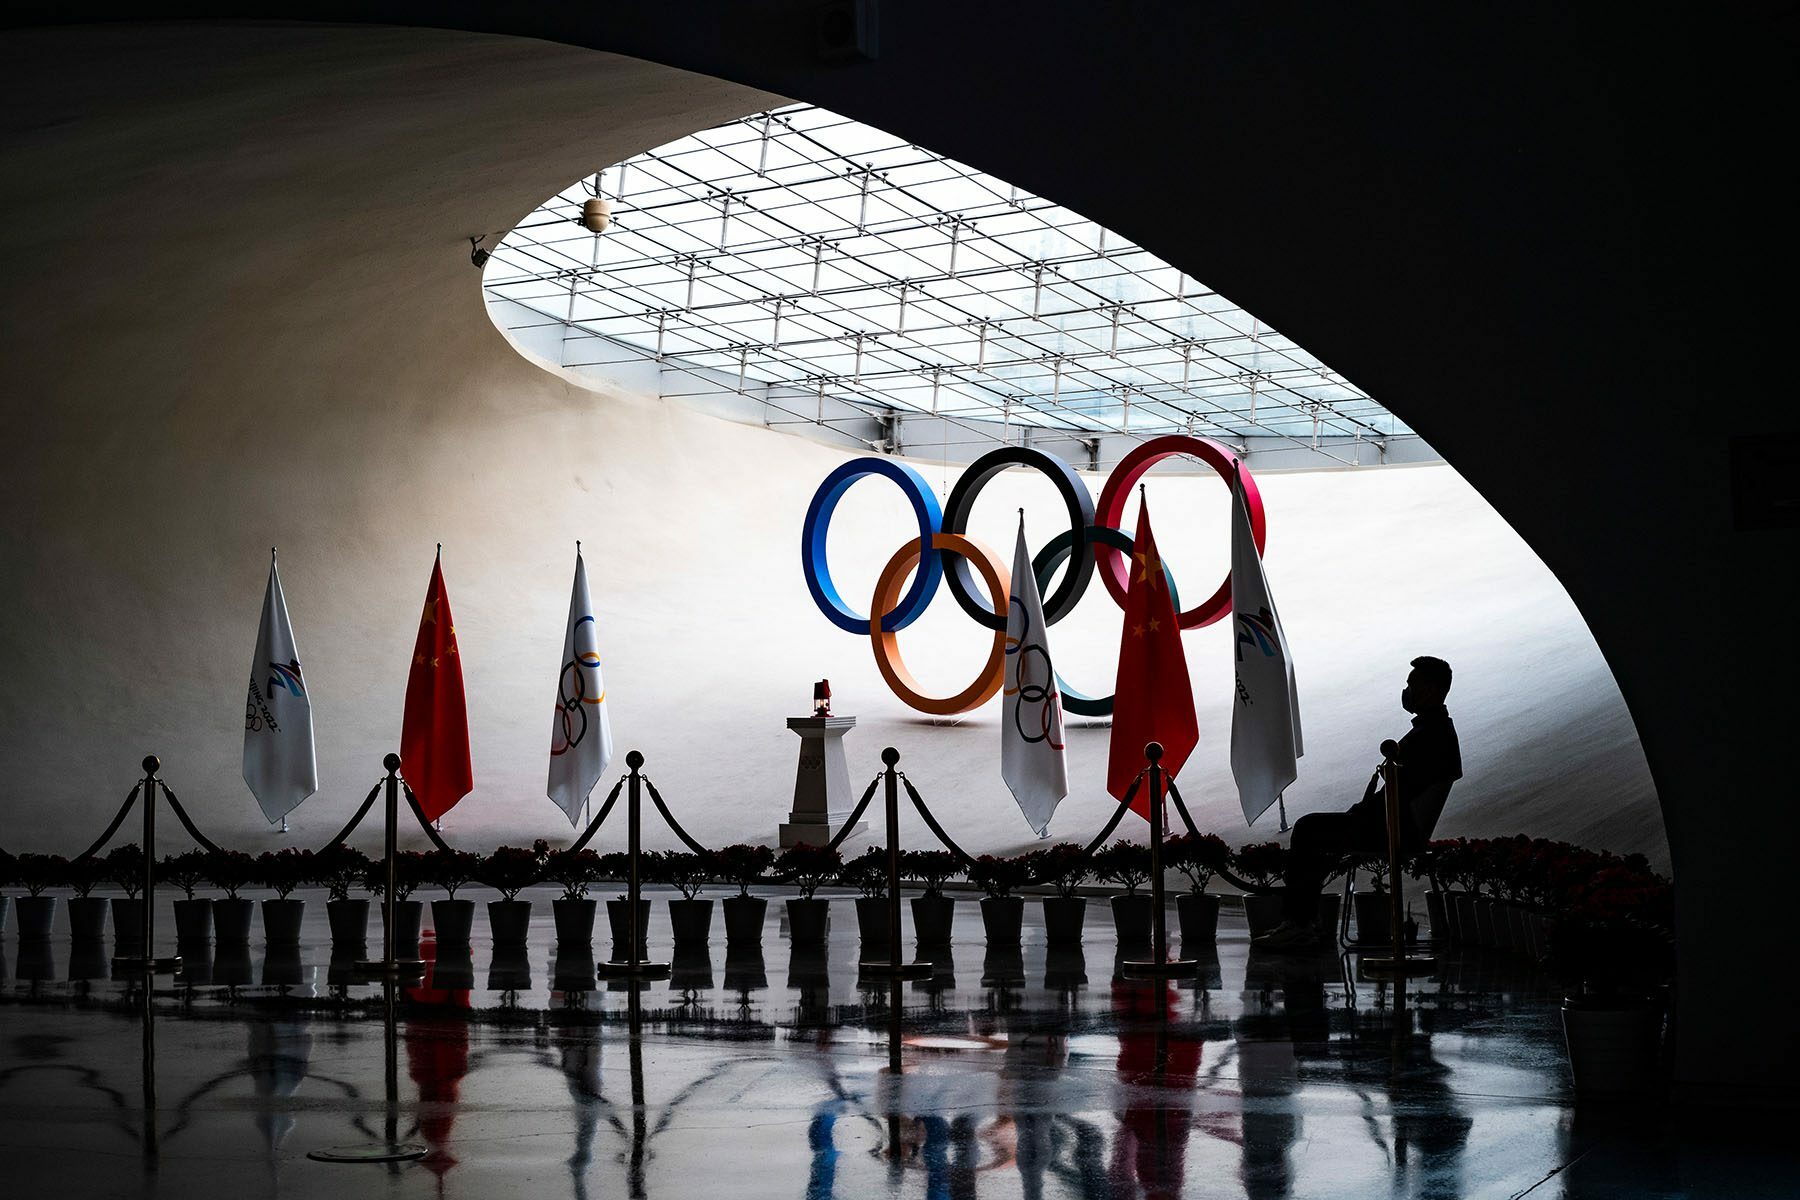 A man guards the olympic flame, which stands in front of Olympic rings.